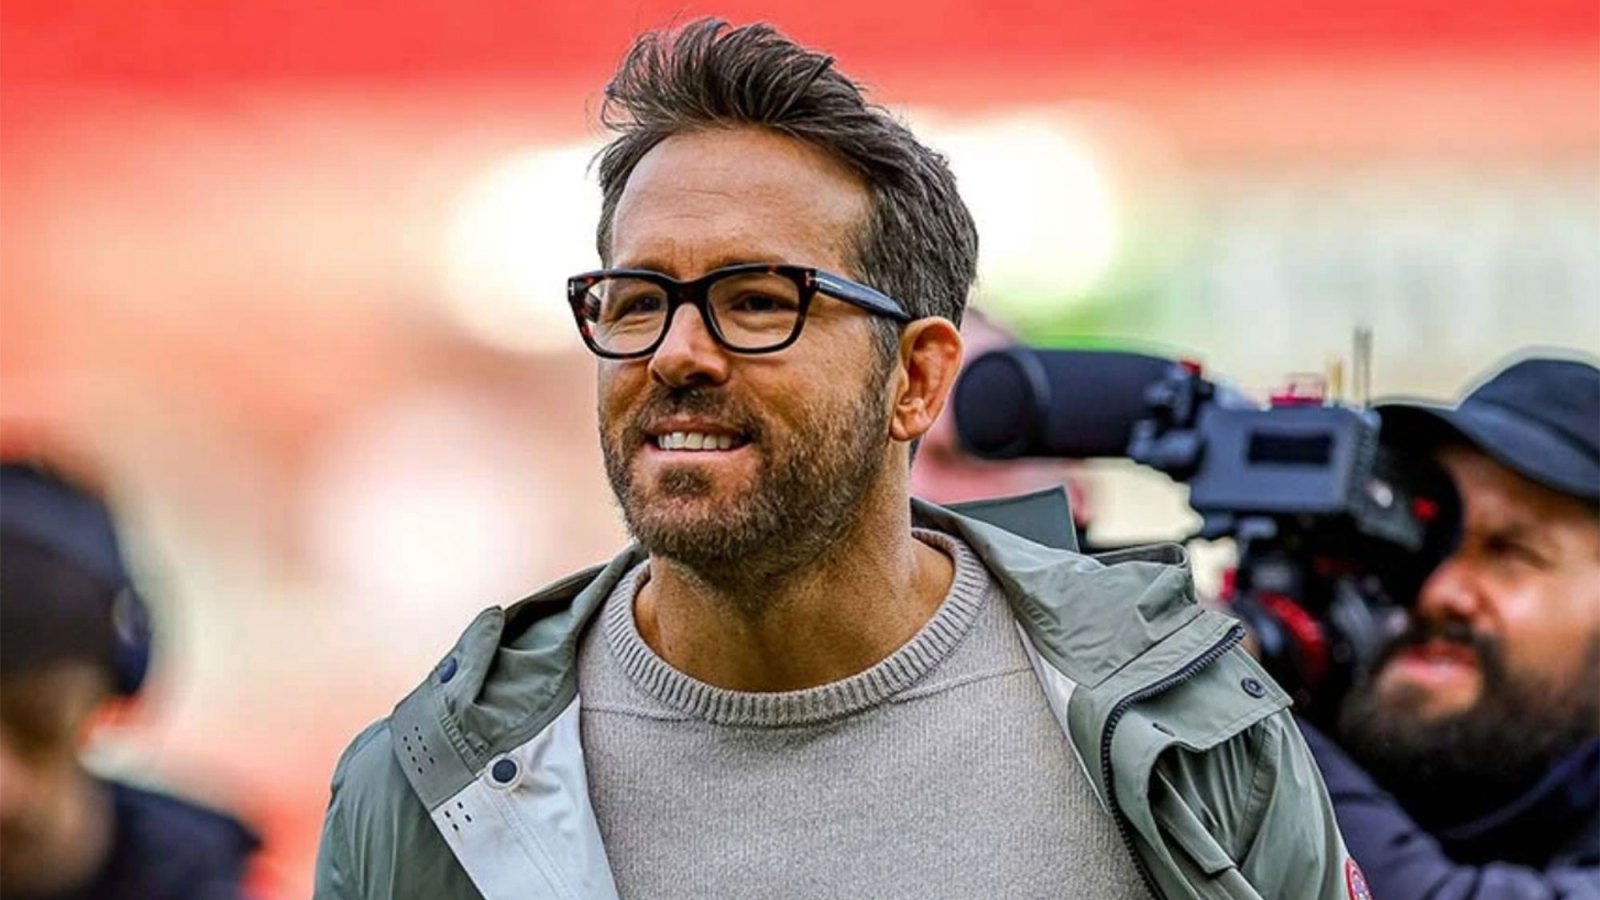 Ryan Reynolds Brings His and Blake Lively's 8-Year-Old Daughter James to Wrexham Soccer Game: Photos